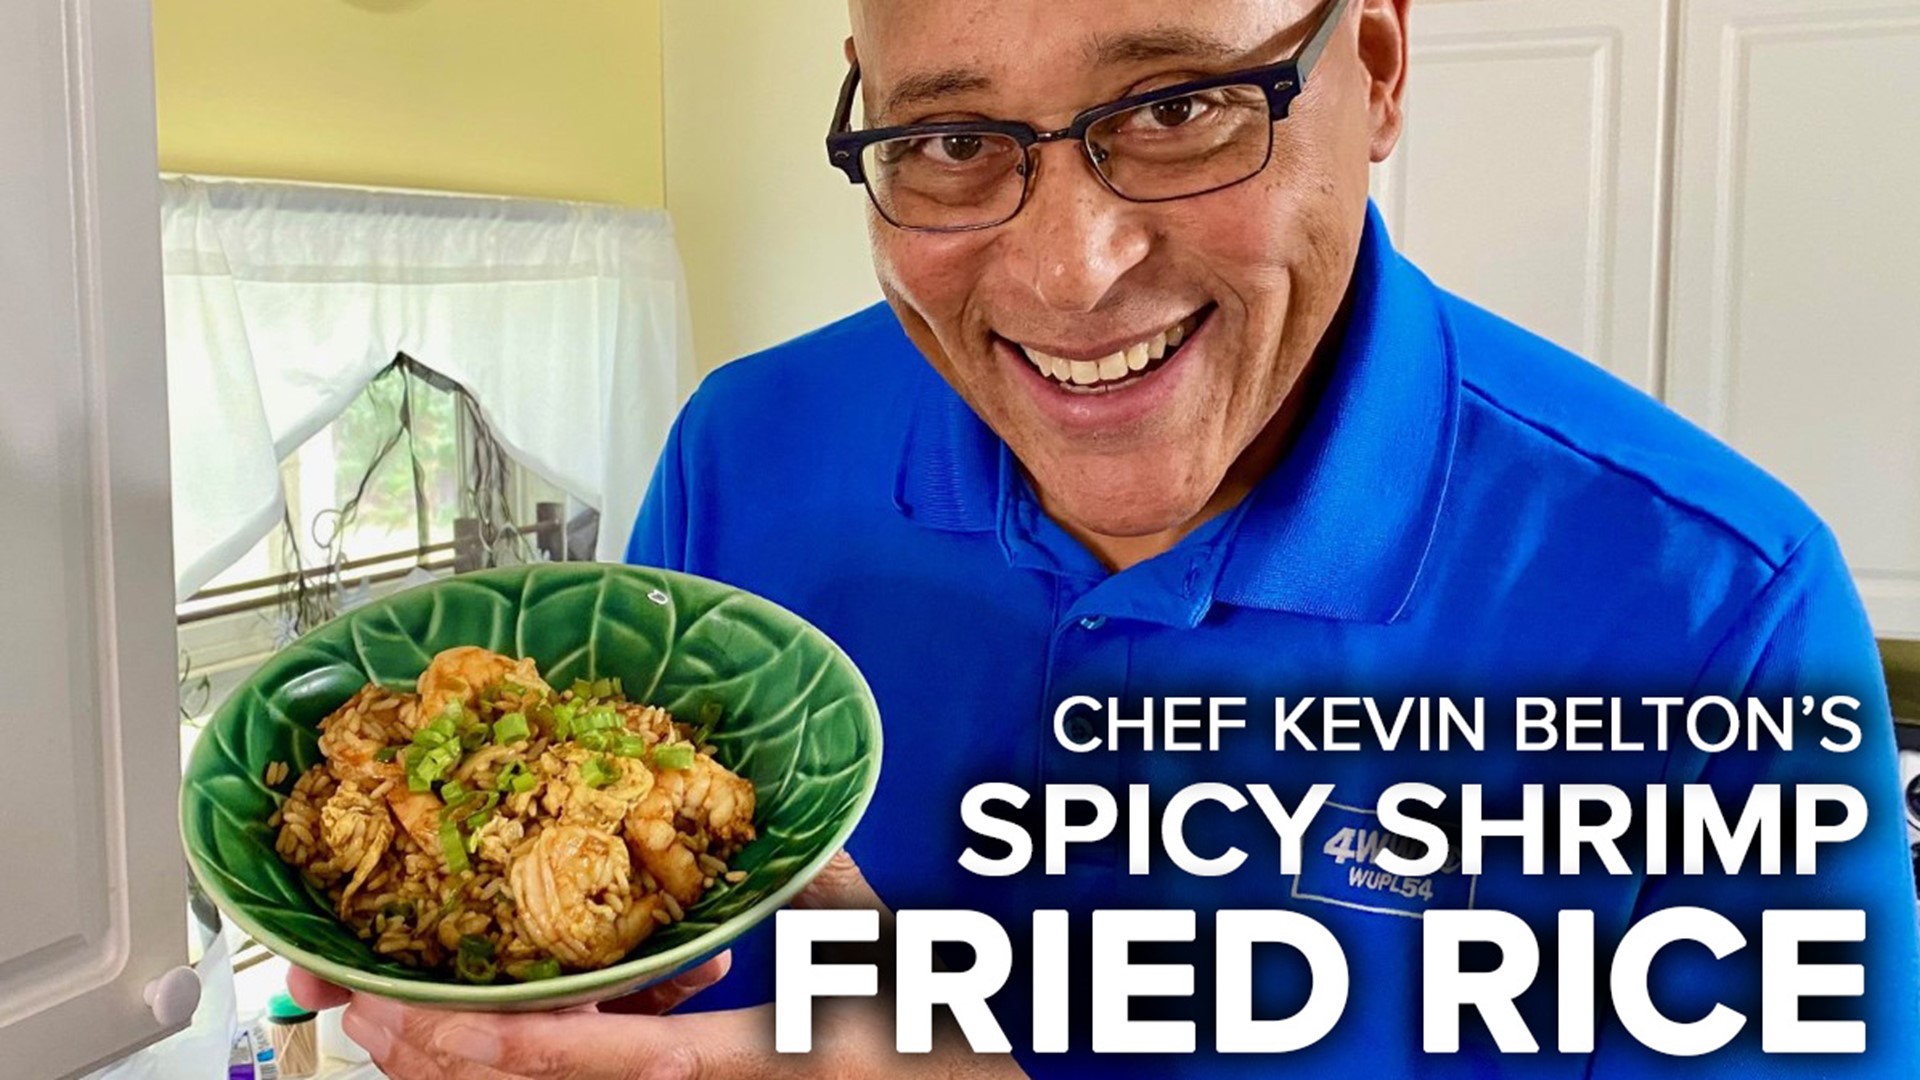 Got leftover rice? Don't waste all that goodness! Turn it into Chef Kevin's Spicy Shrimp Fried Rice!